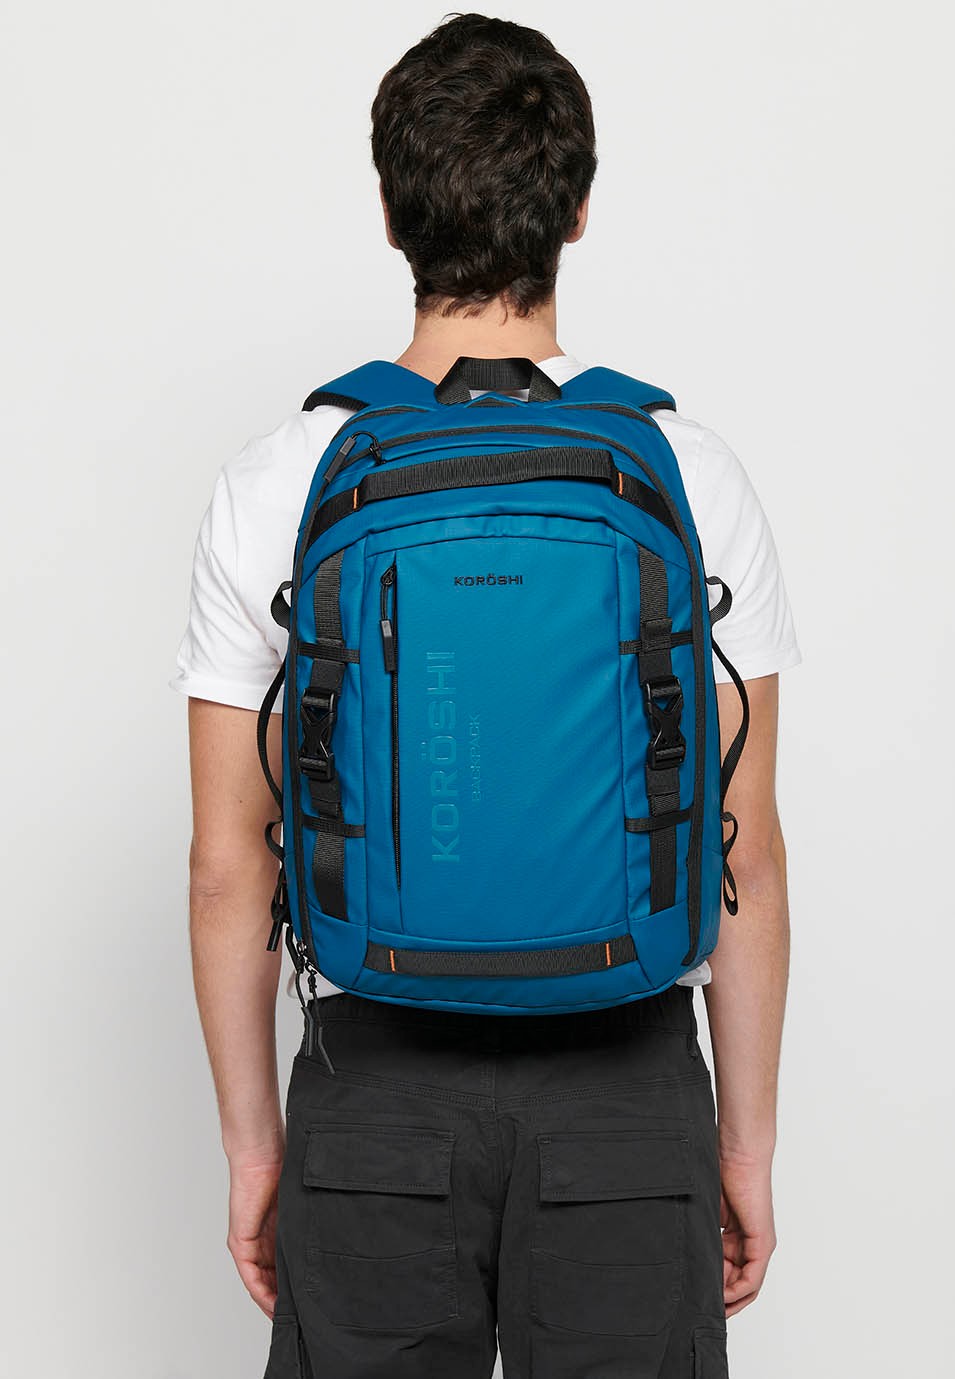 Koröshi backpack with two zippered compartments, one for a laptop and adjustable straps in Blue 6